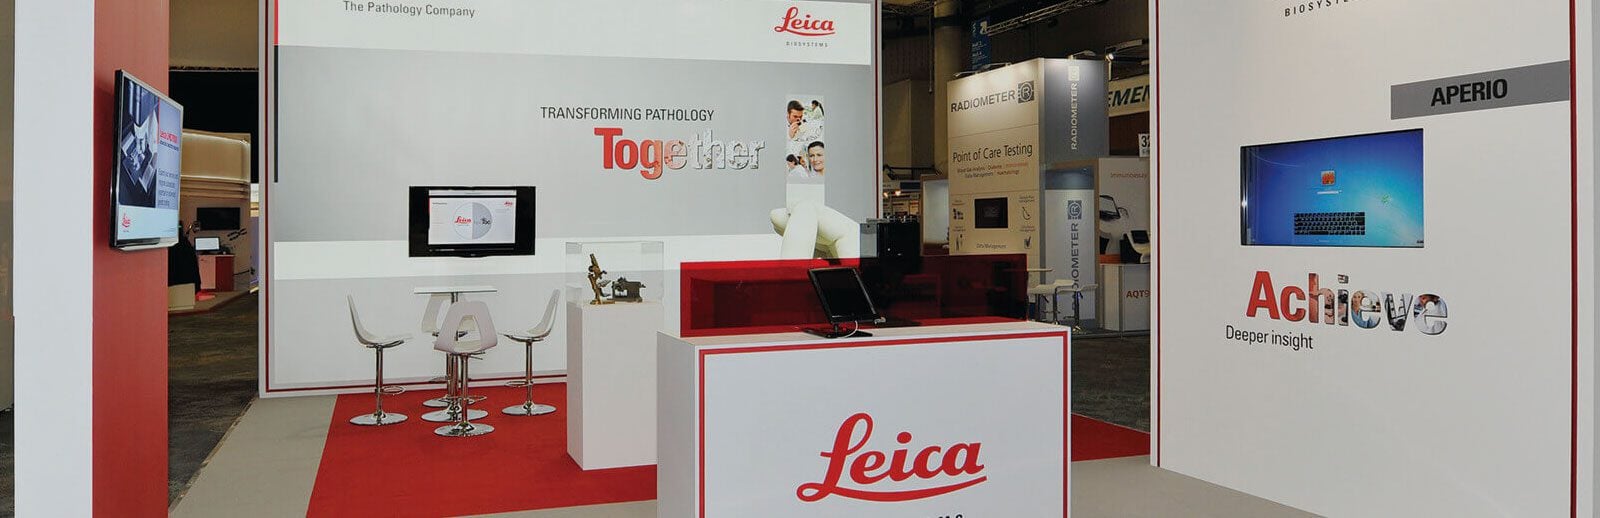 Leica branded stand